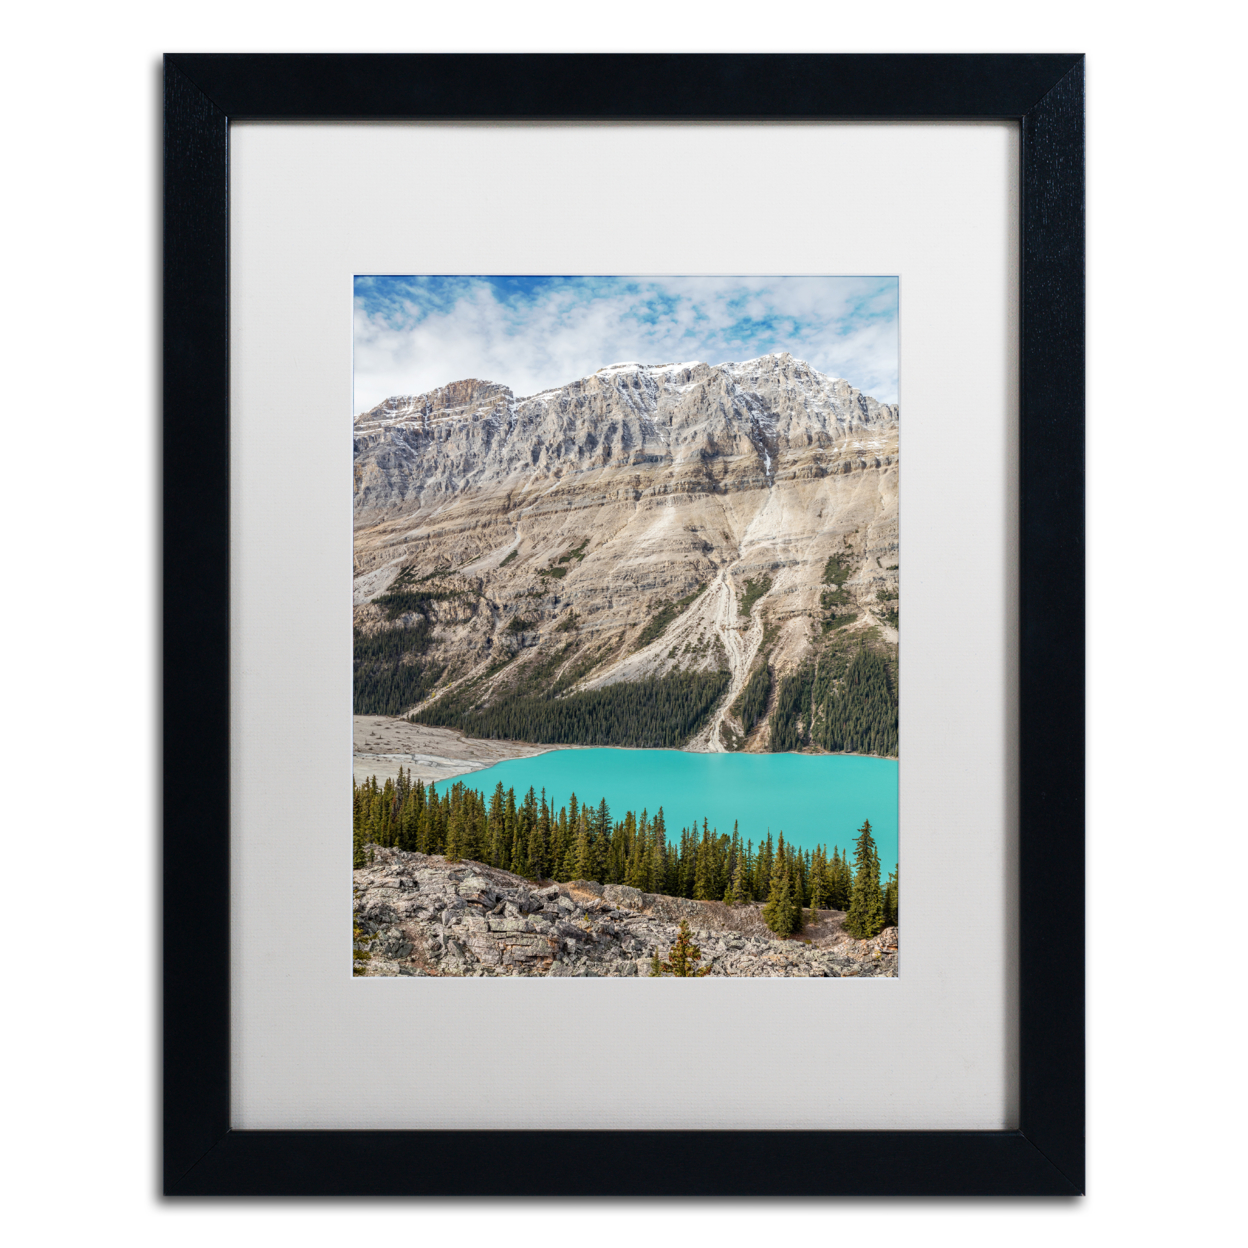 Pierre Leclerc 'Turquoise Lake In The Rockies' Black Wooden Framed Art 18 X 22 Inches